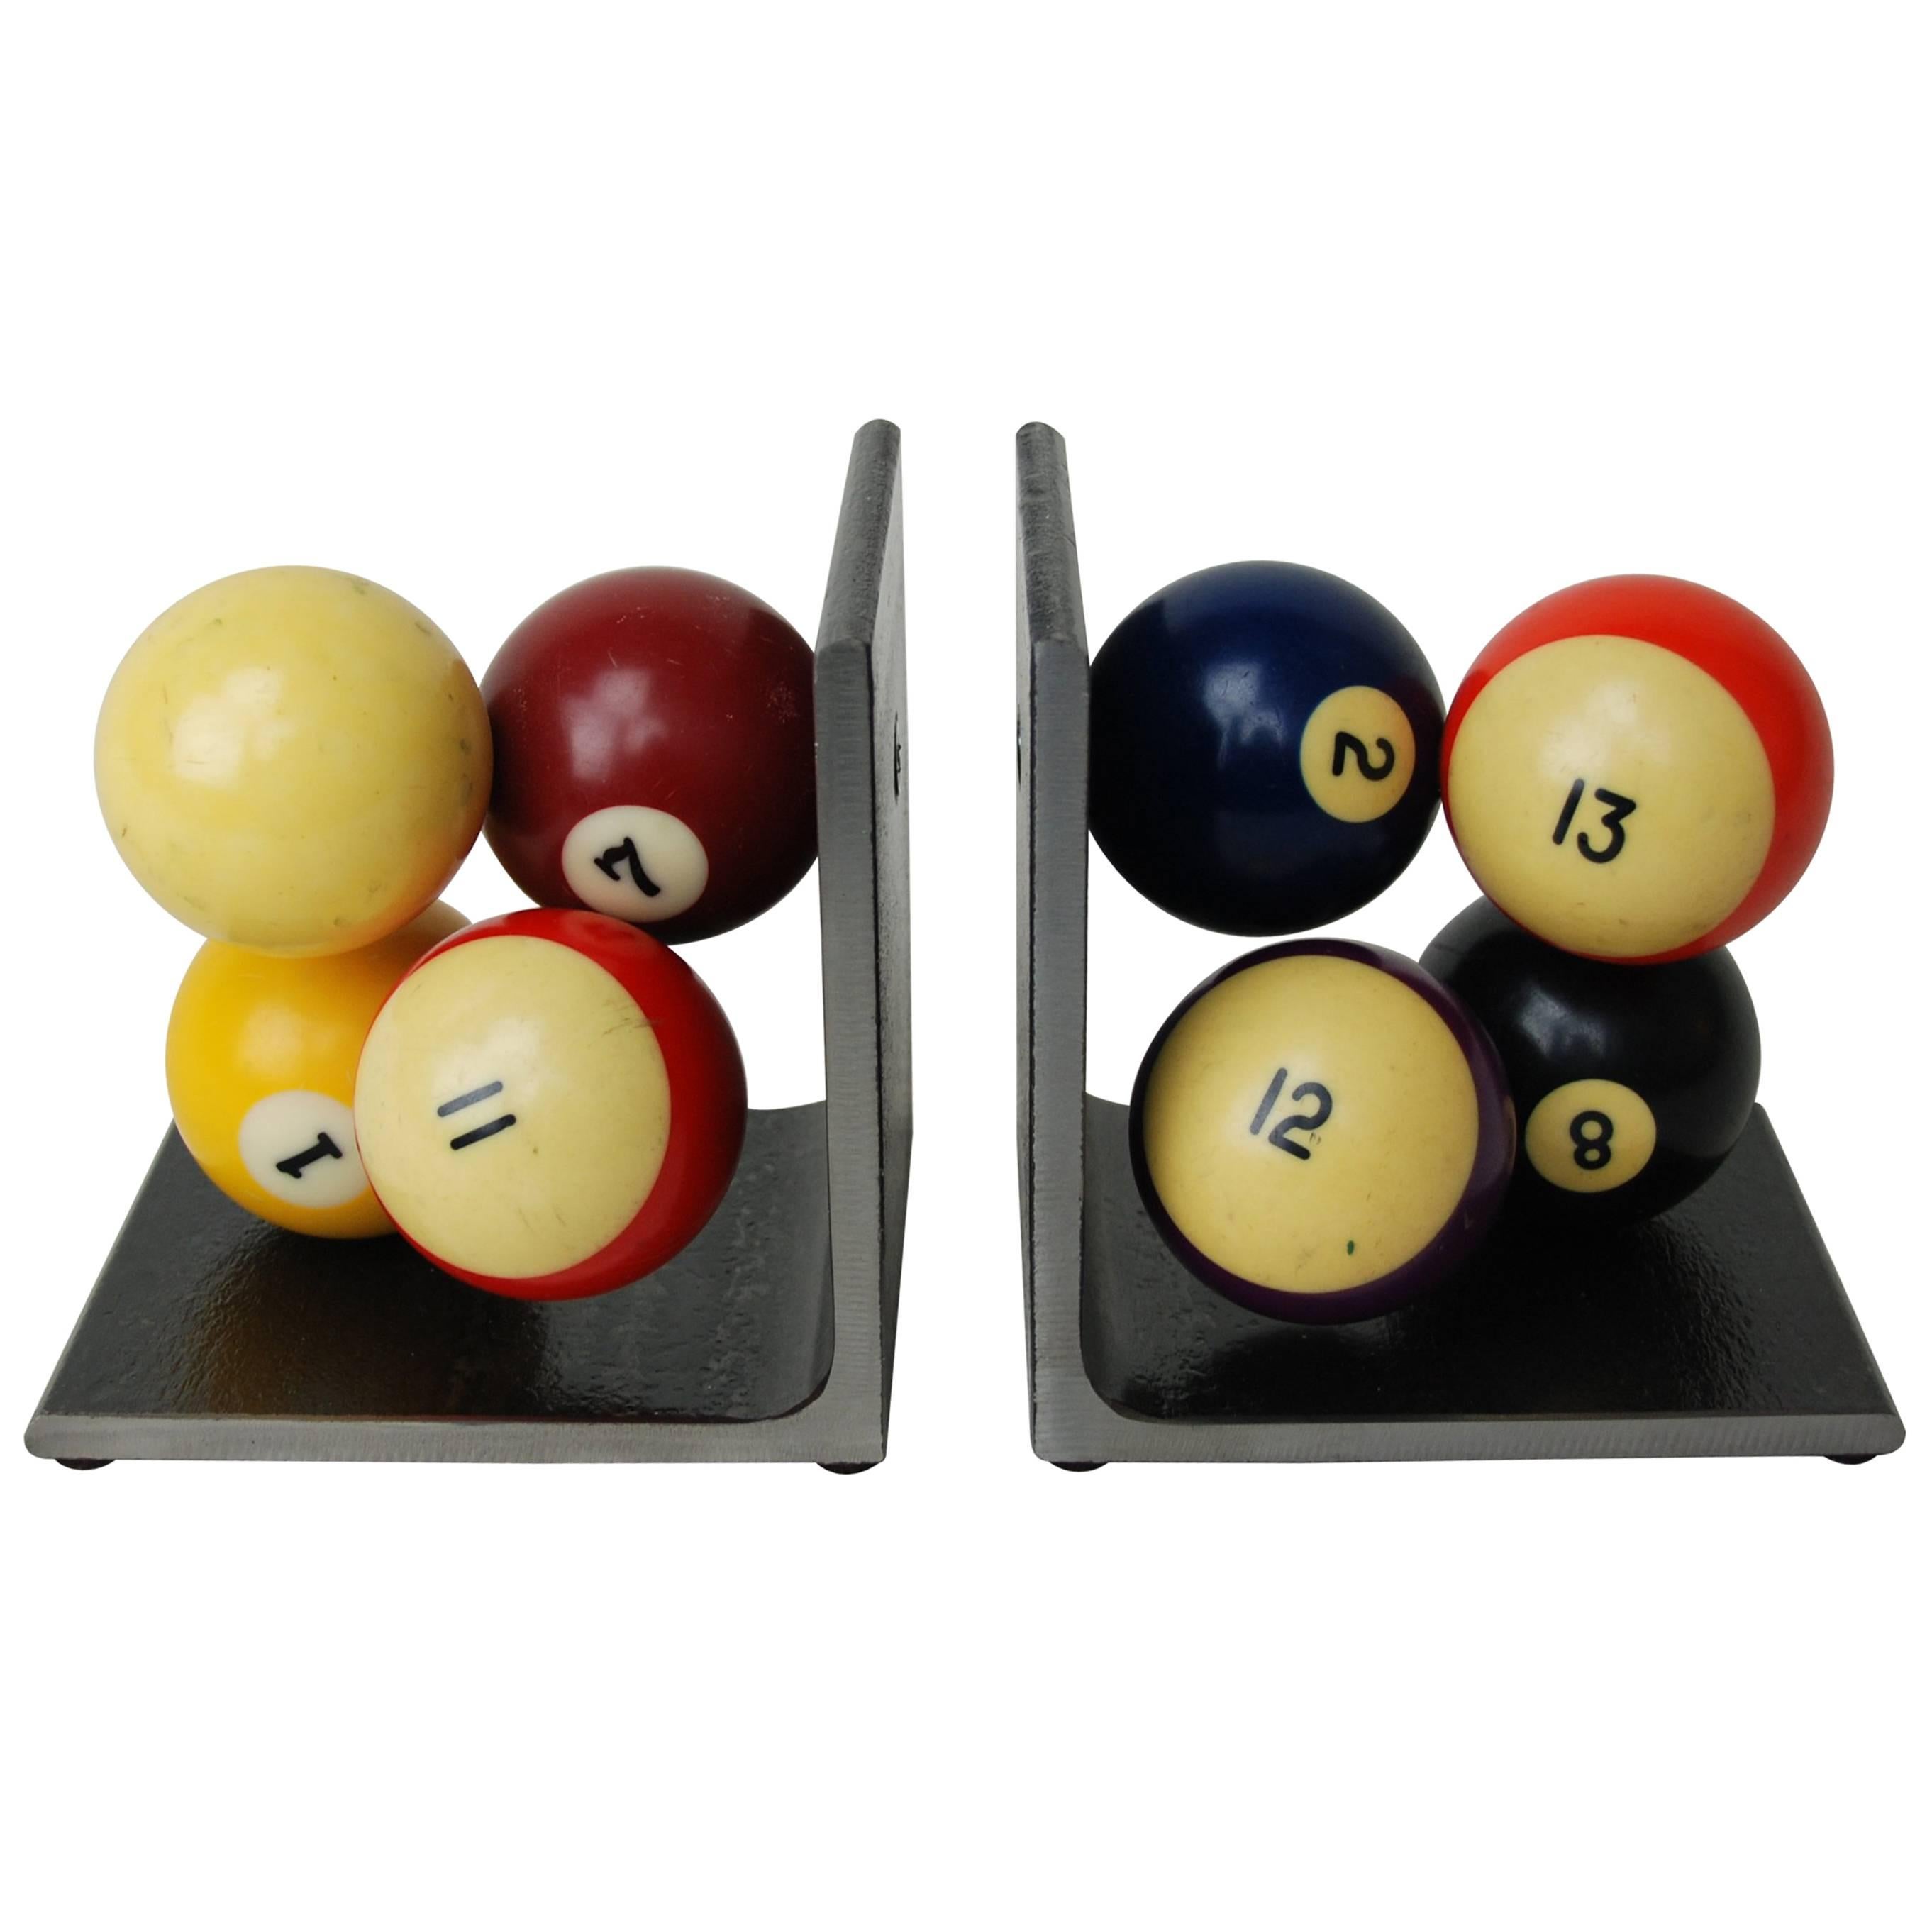 Vintage Billiard Ball Bookends, Industrial, Handcrafted, Artisan